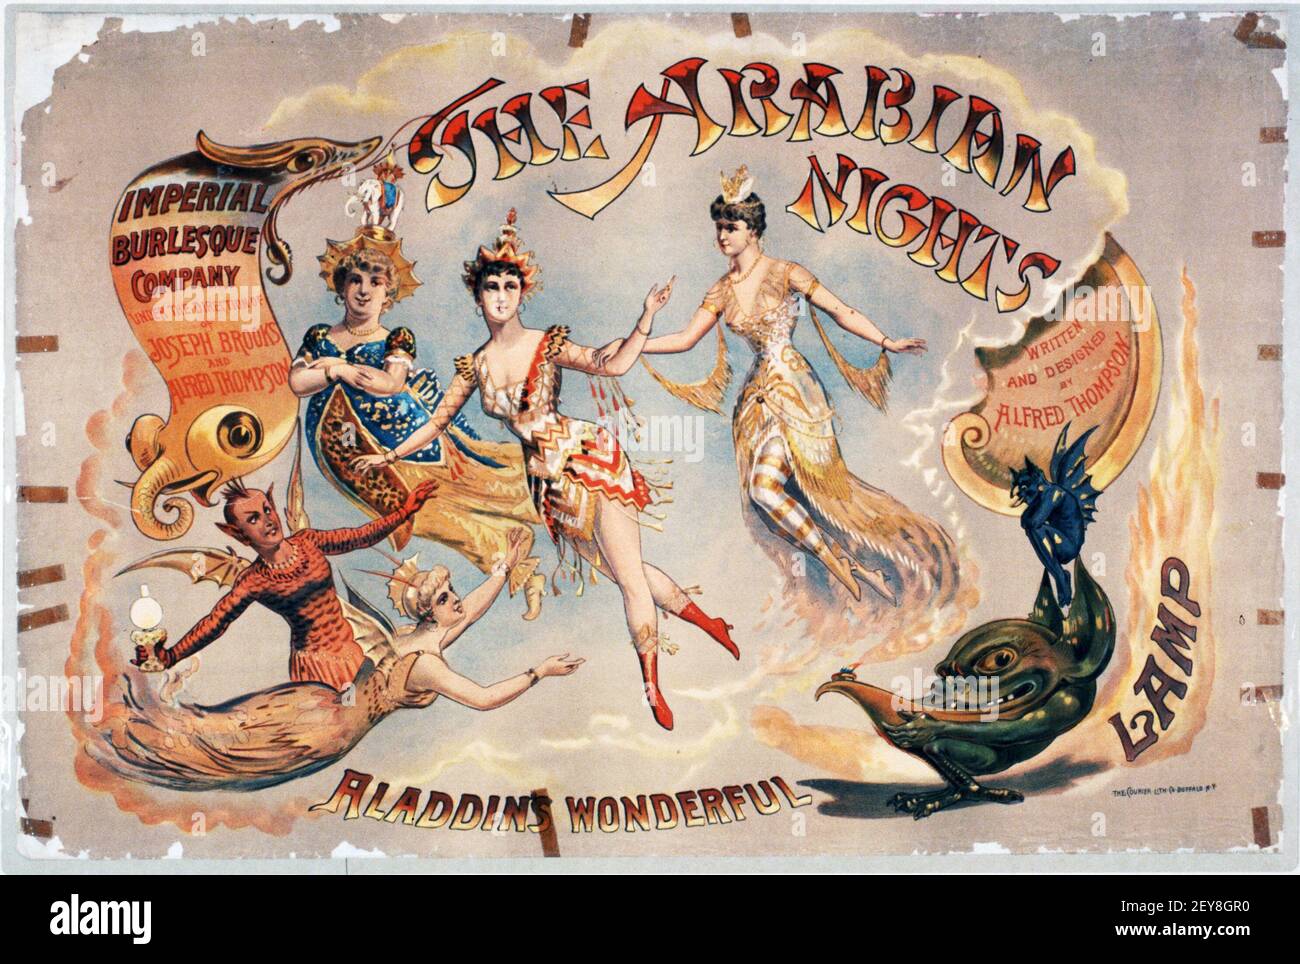 The Arabian Nights or Aladdins Wonderful Lamp. Classic Show poster. Imperial Burlesque Co. 1888. Stock Photo